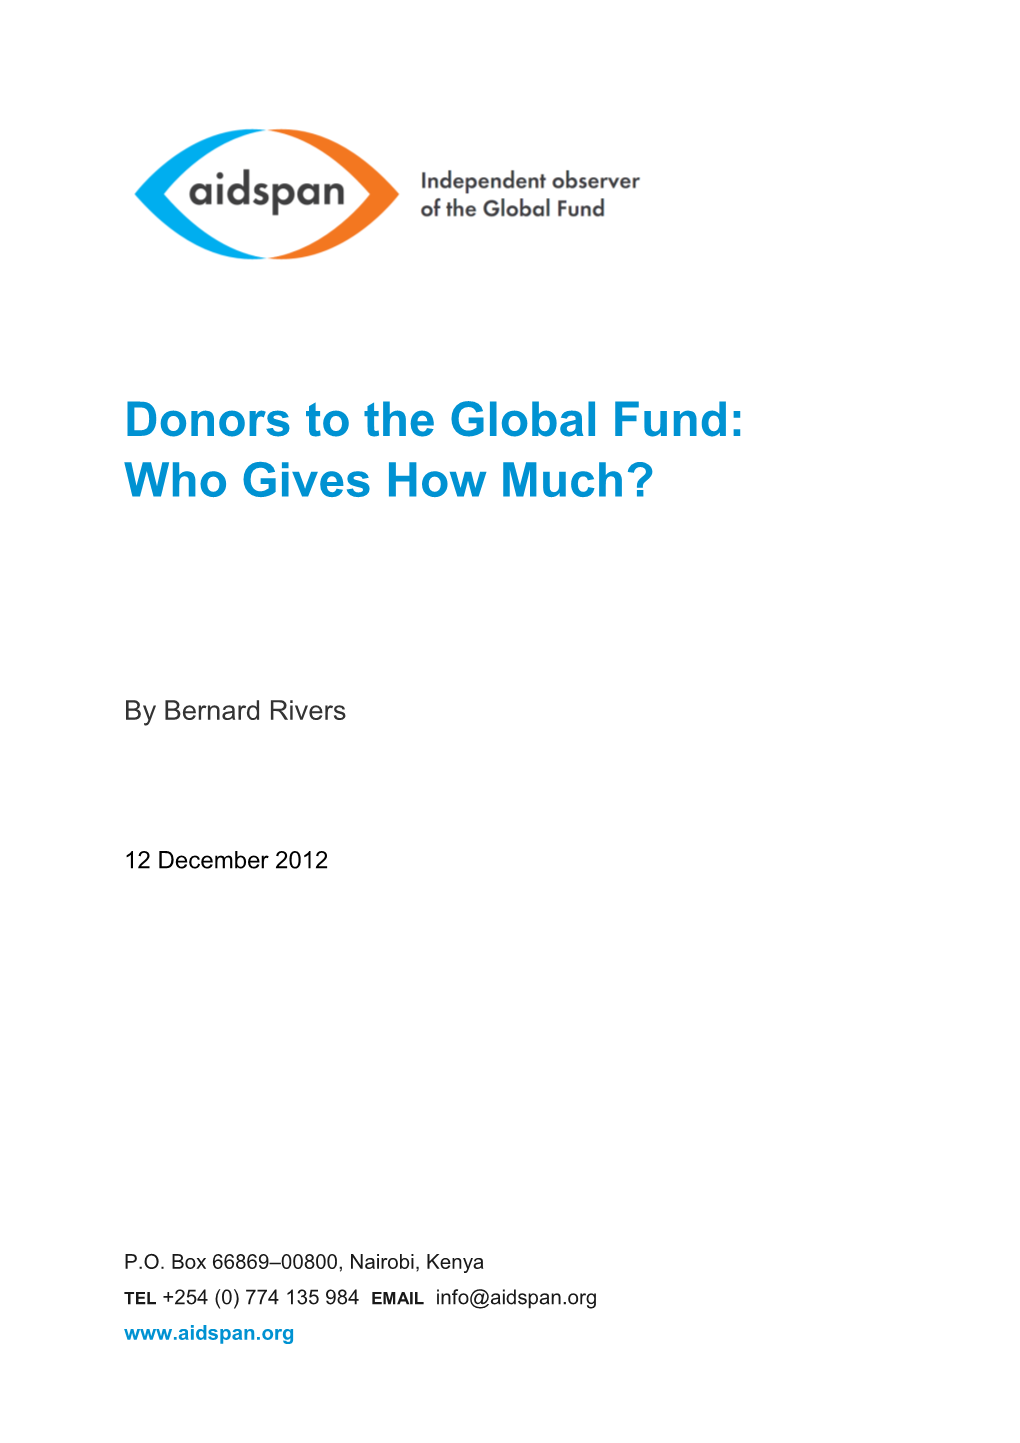 Donors to the Global Fund: Who Gives How Much?